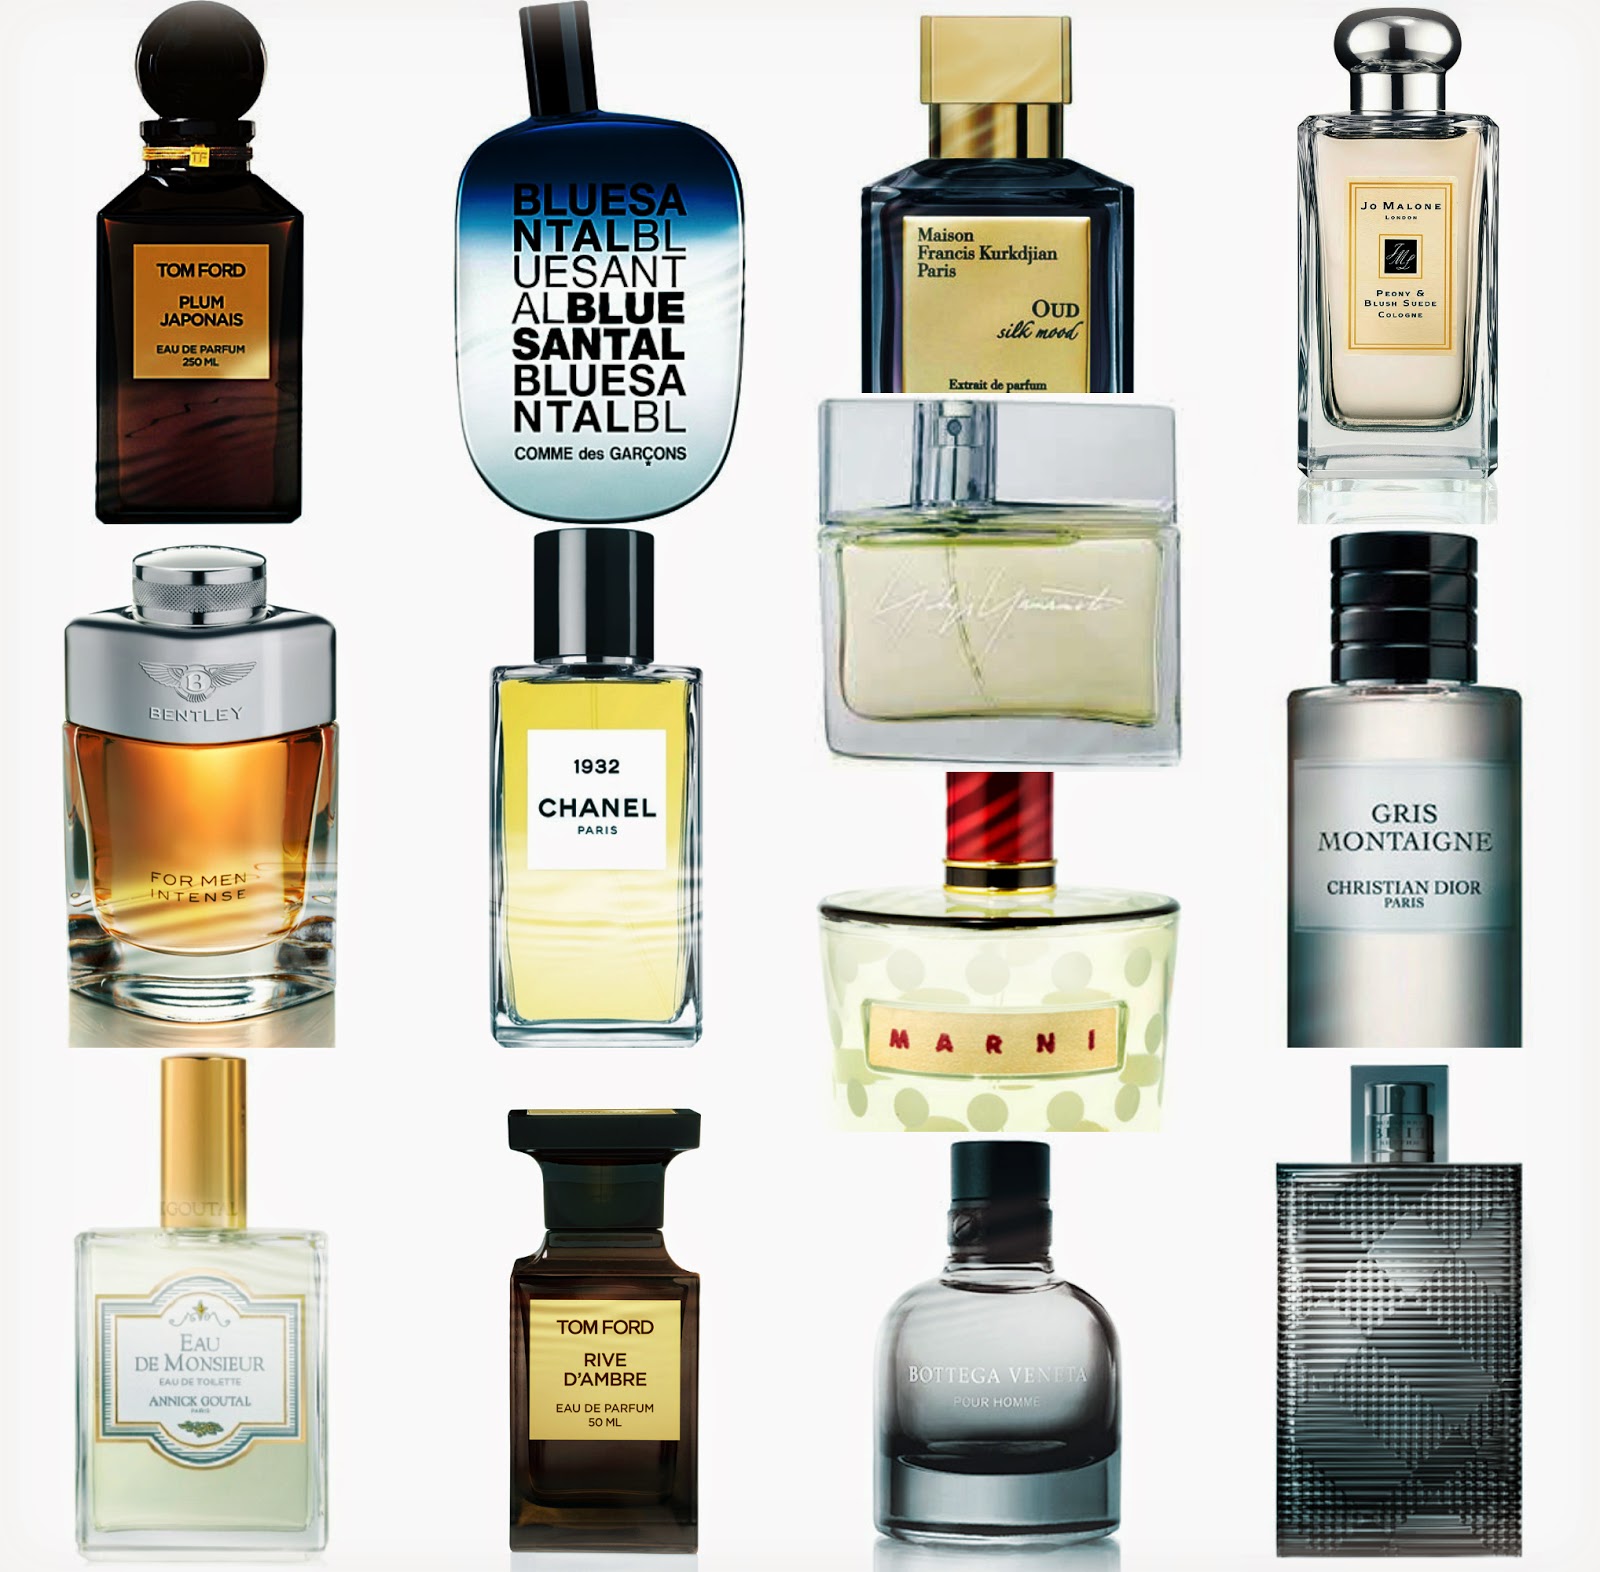 Persolaise - A Perfume Blog